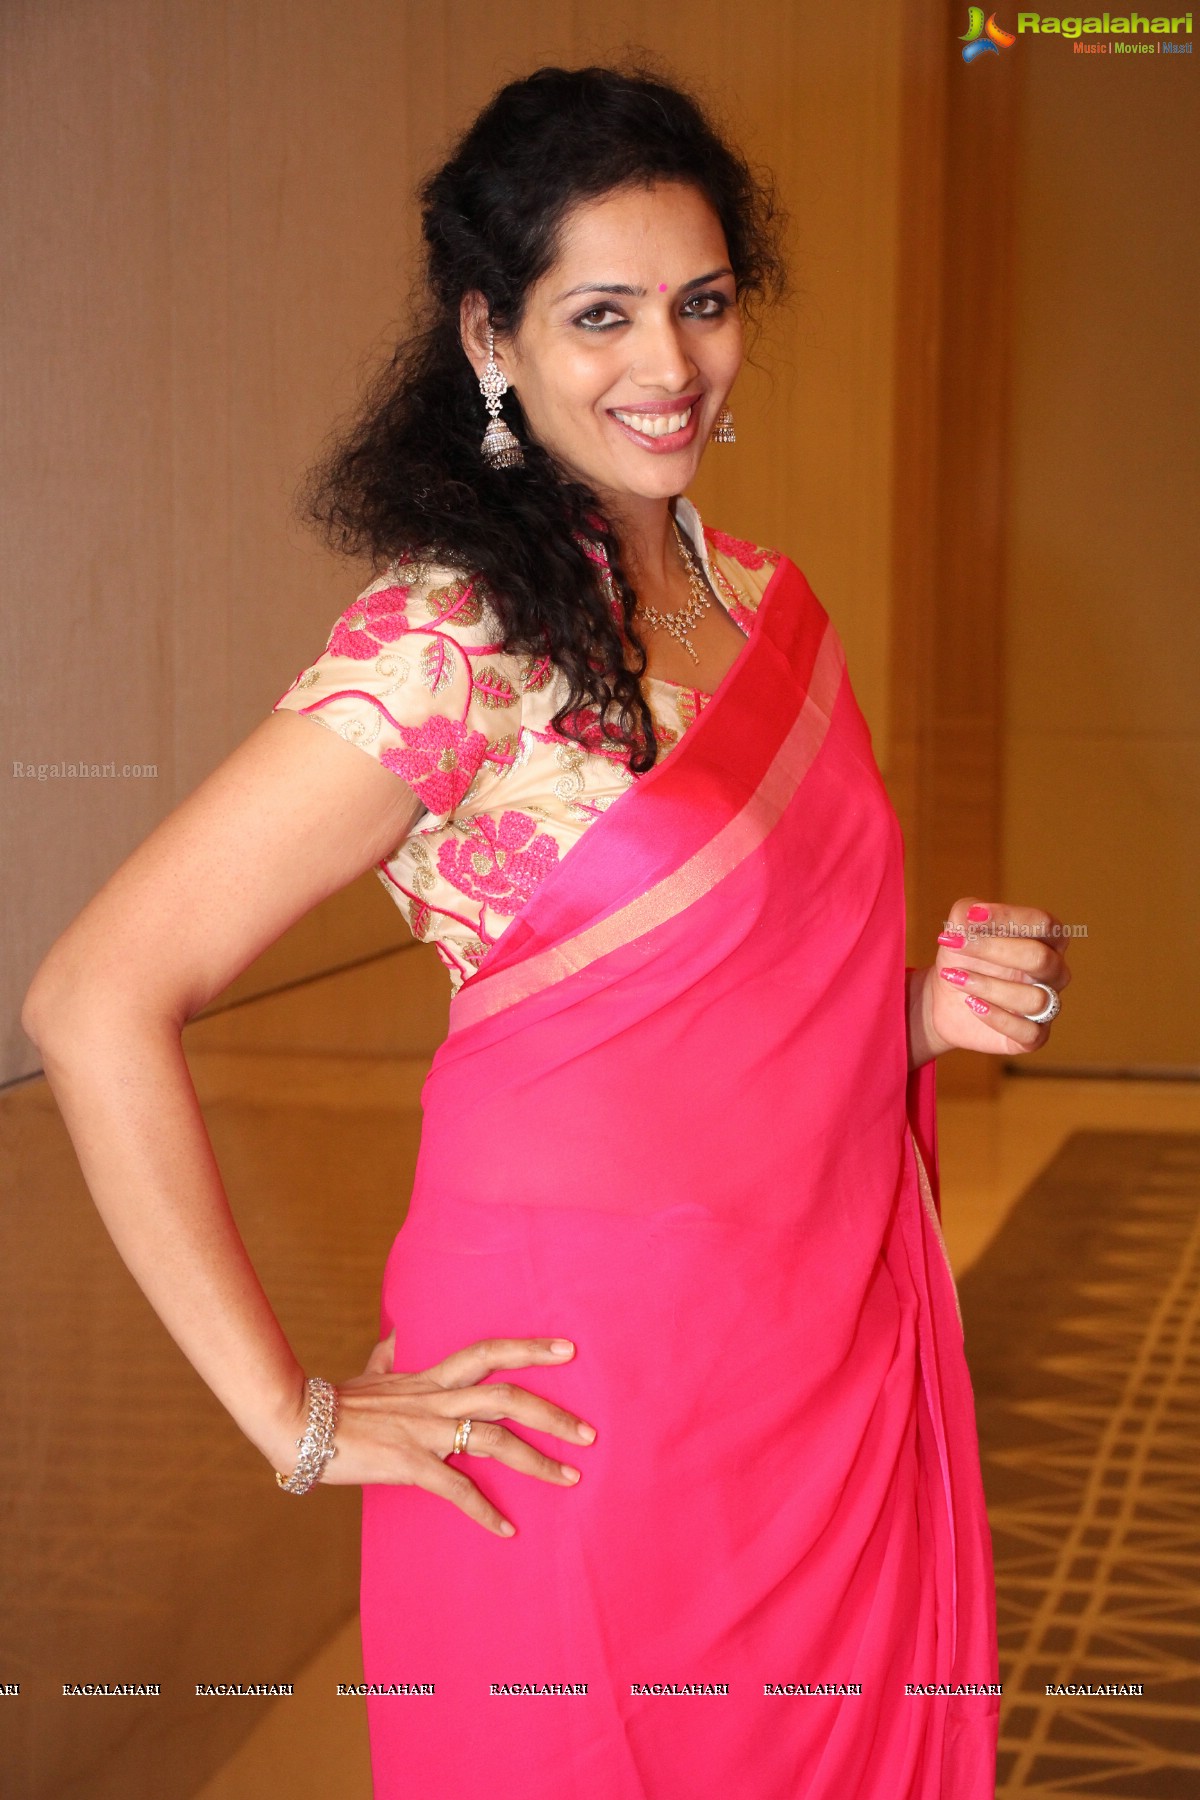 Diwali Bash by Queens Lounge at Trident Hotel, Hyderabad